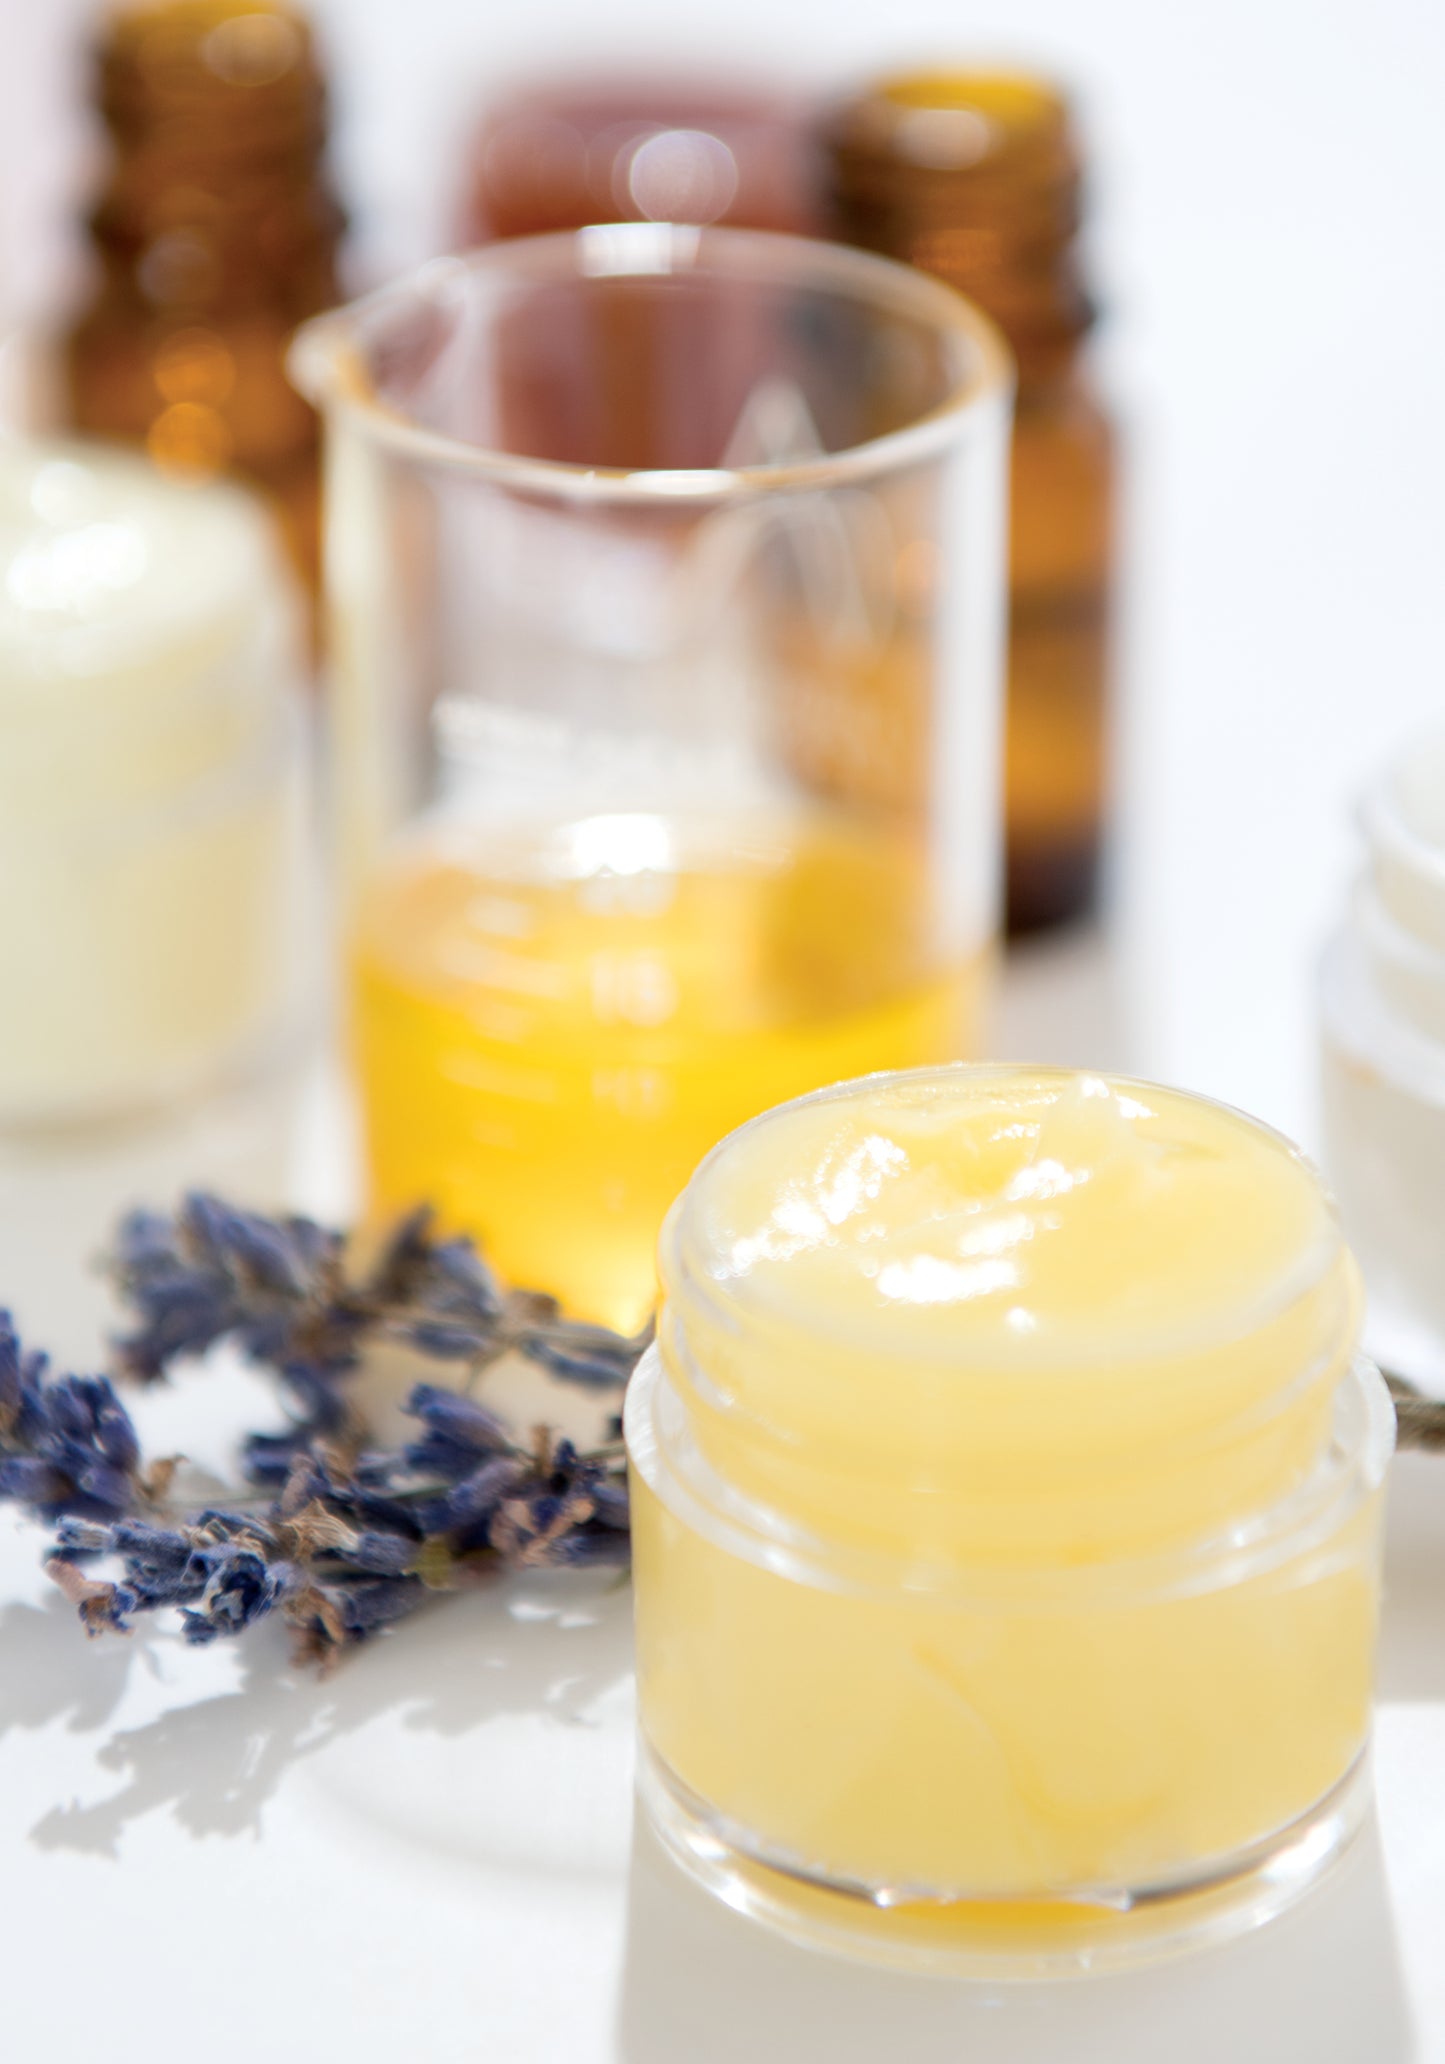 Aromatherapy Beauty Guide to Skin Care